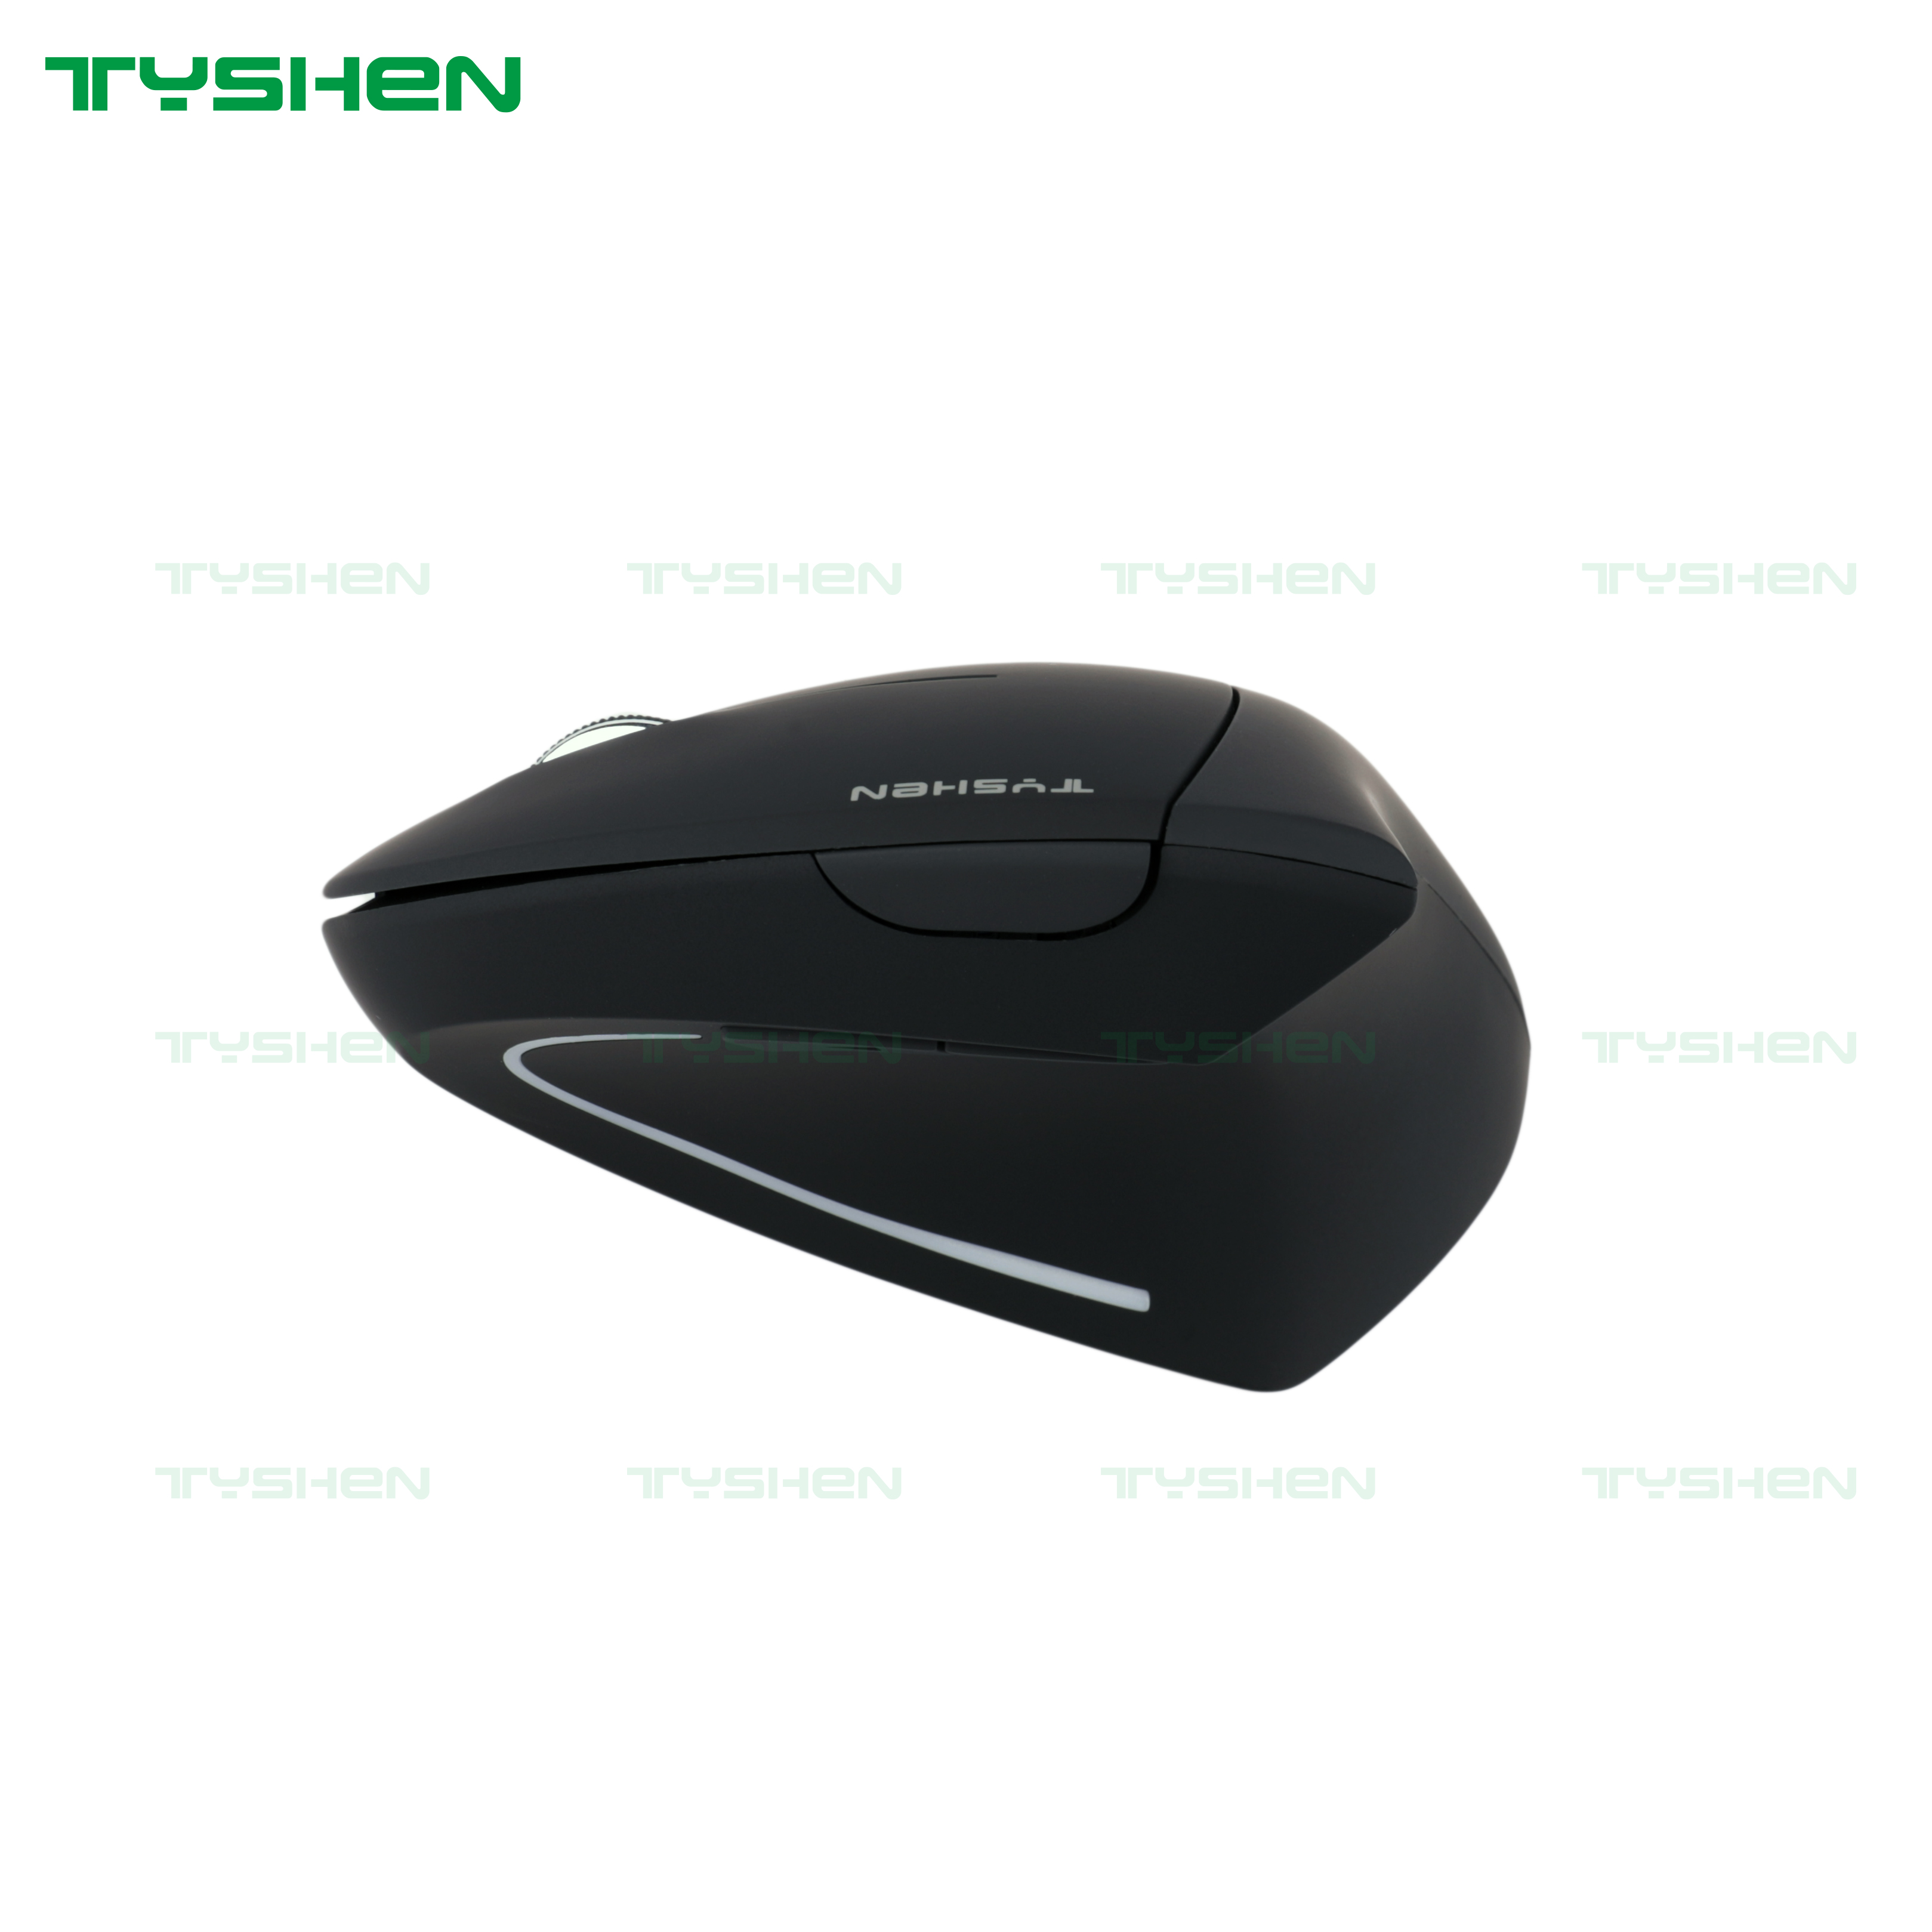 Shark Wireless Vertical Mouse,5th Generation,Rubber Oil Finished,Powered by 2*AAA Battery,Color Box Packing